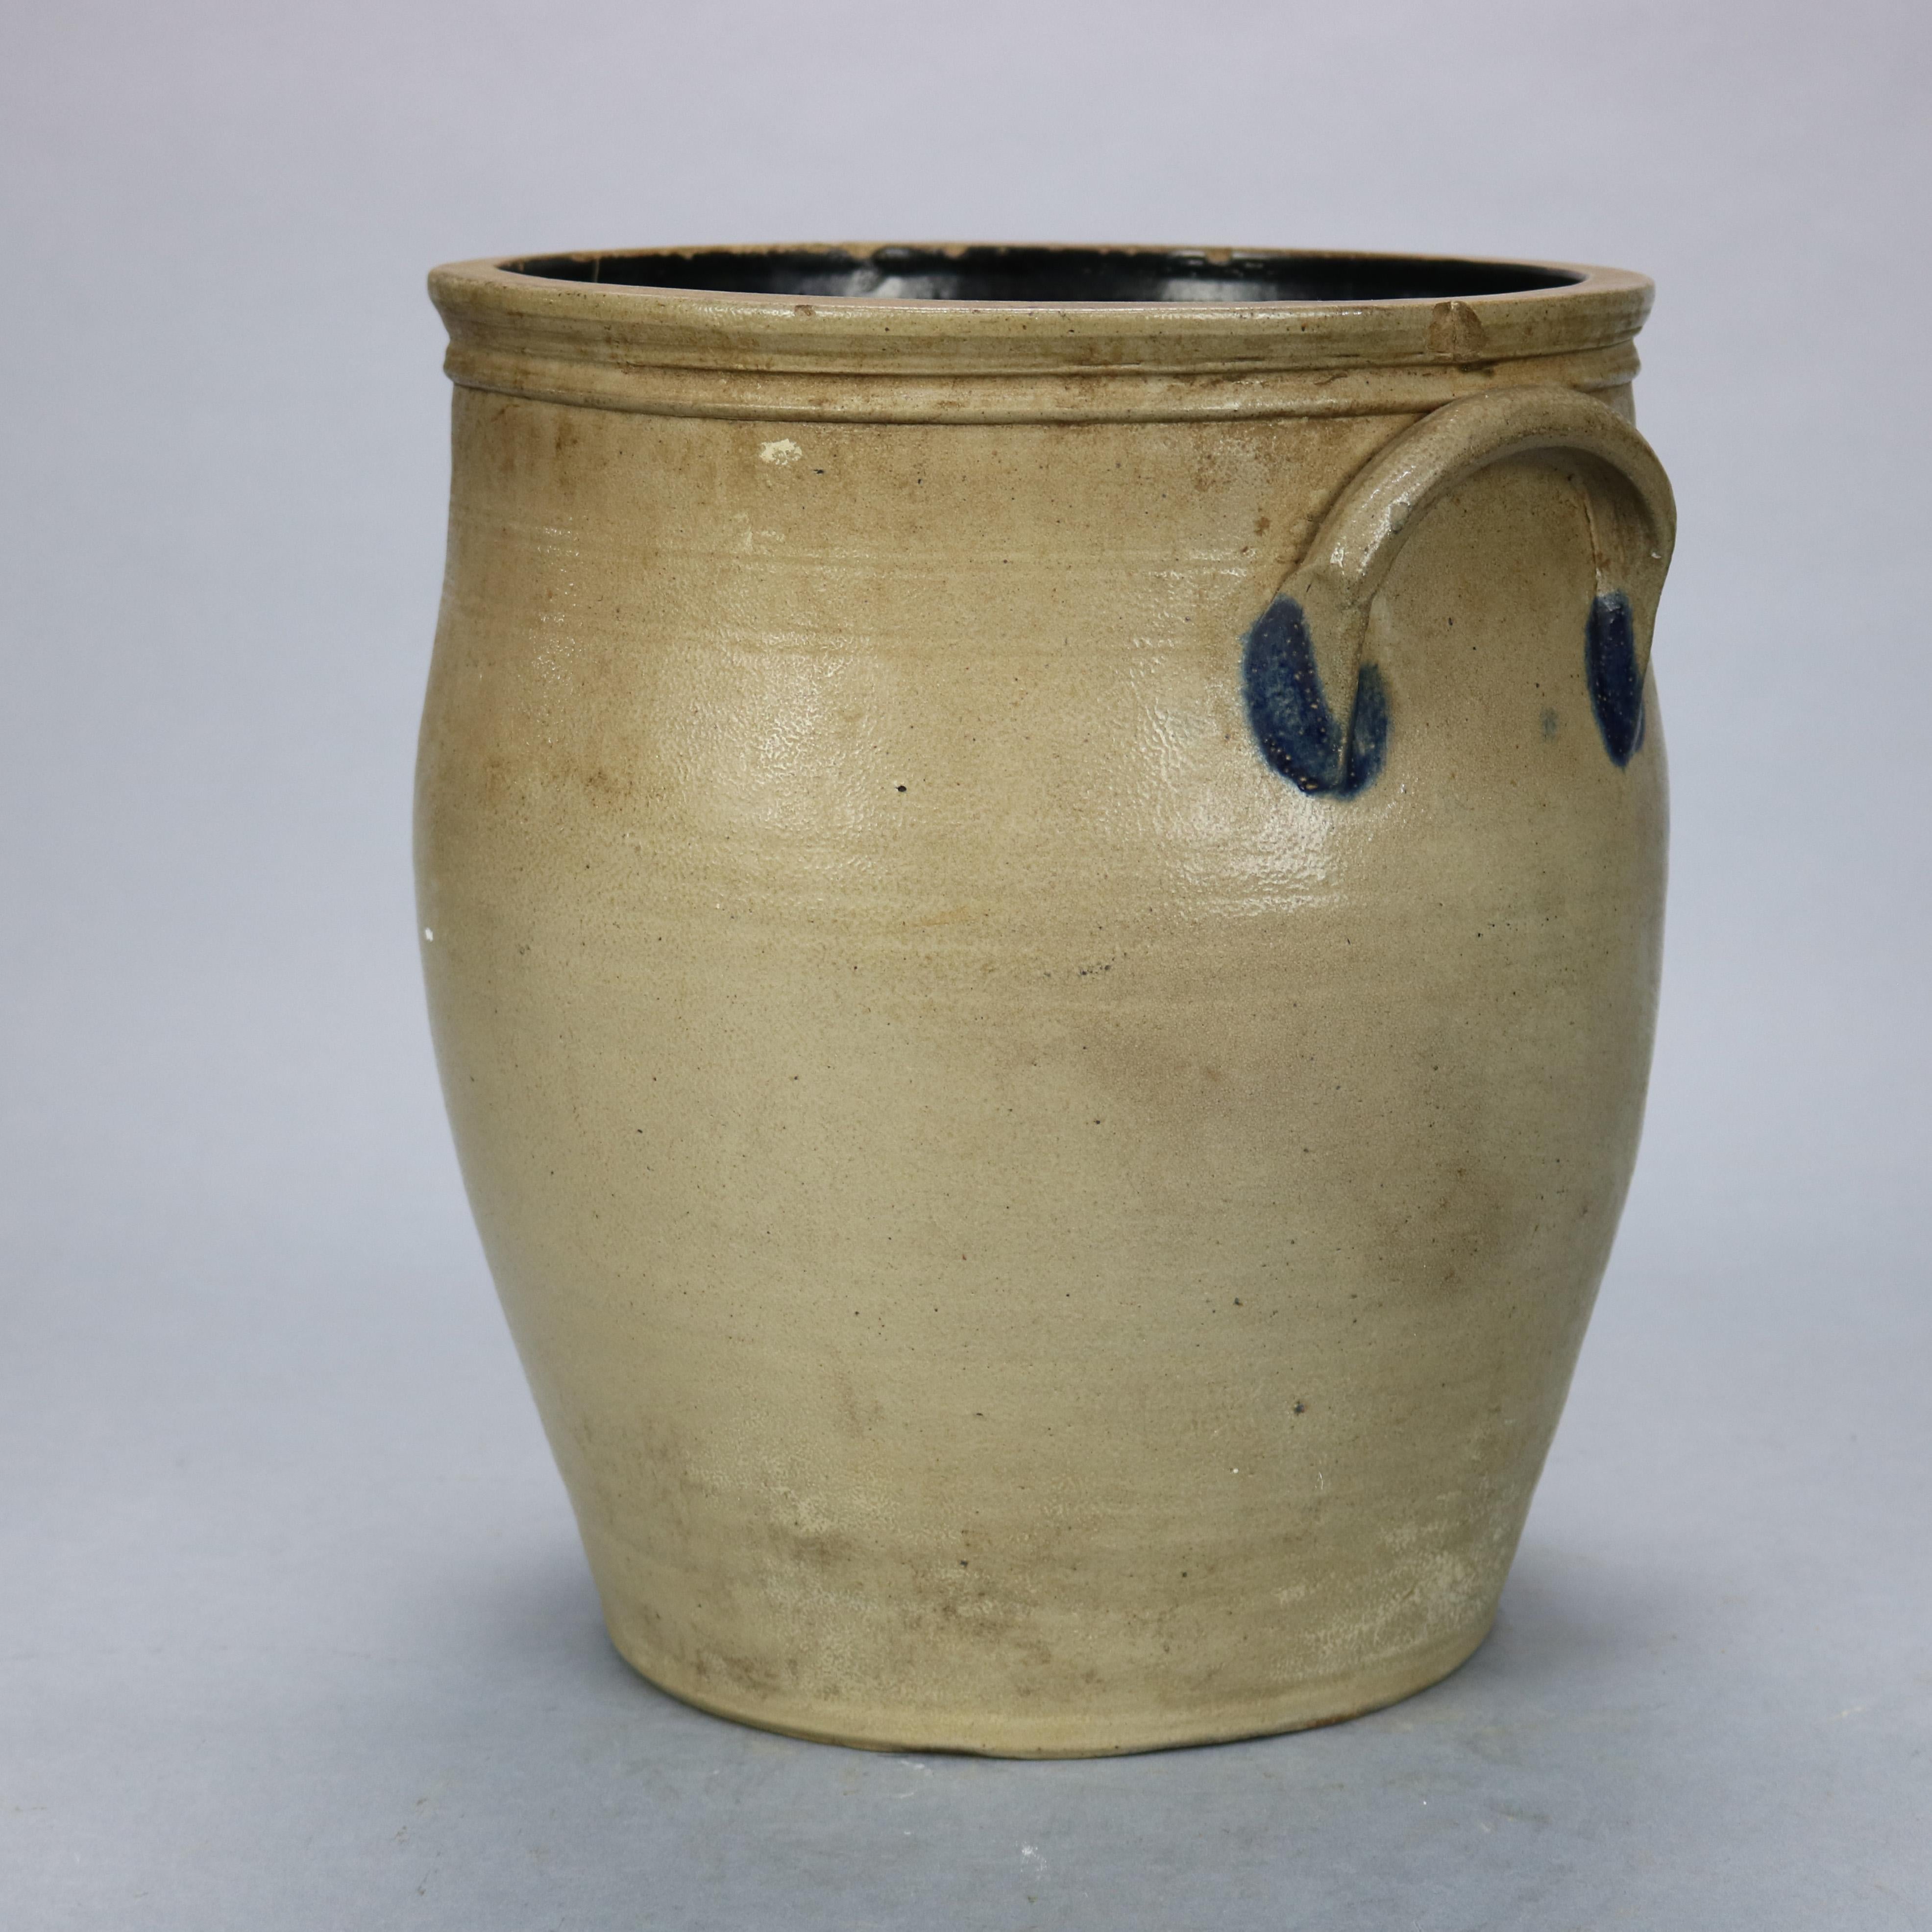 Fired Antique N Clark & Co Lyons Four-Gallon Blue Decorated Stoneware Crock, 19th C